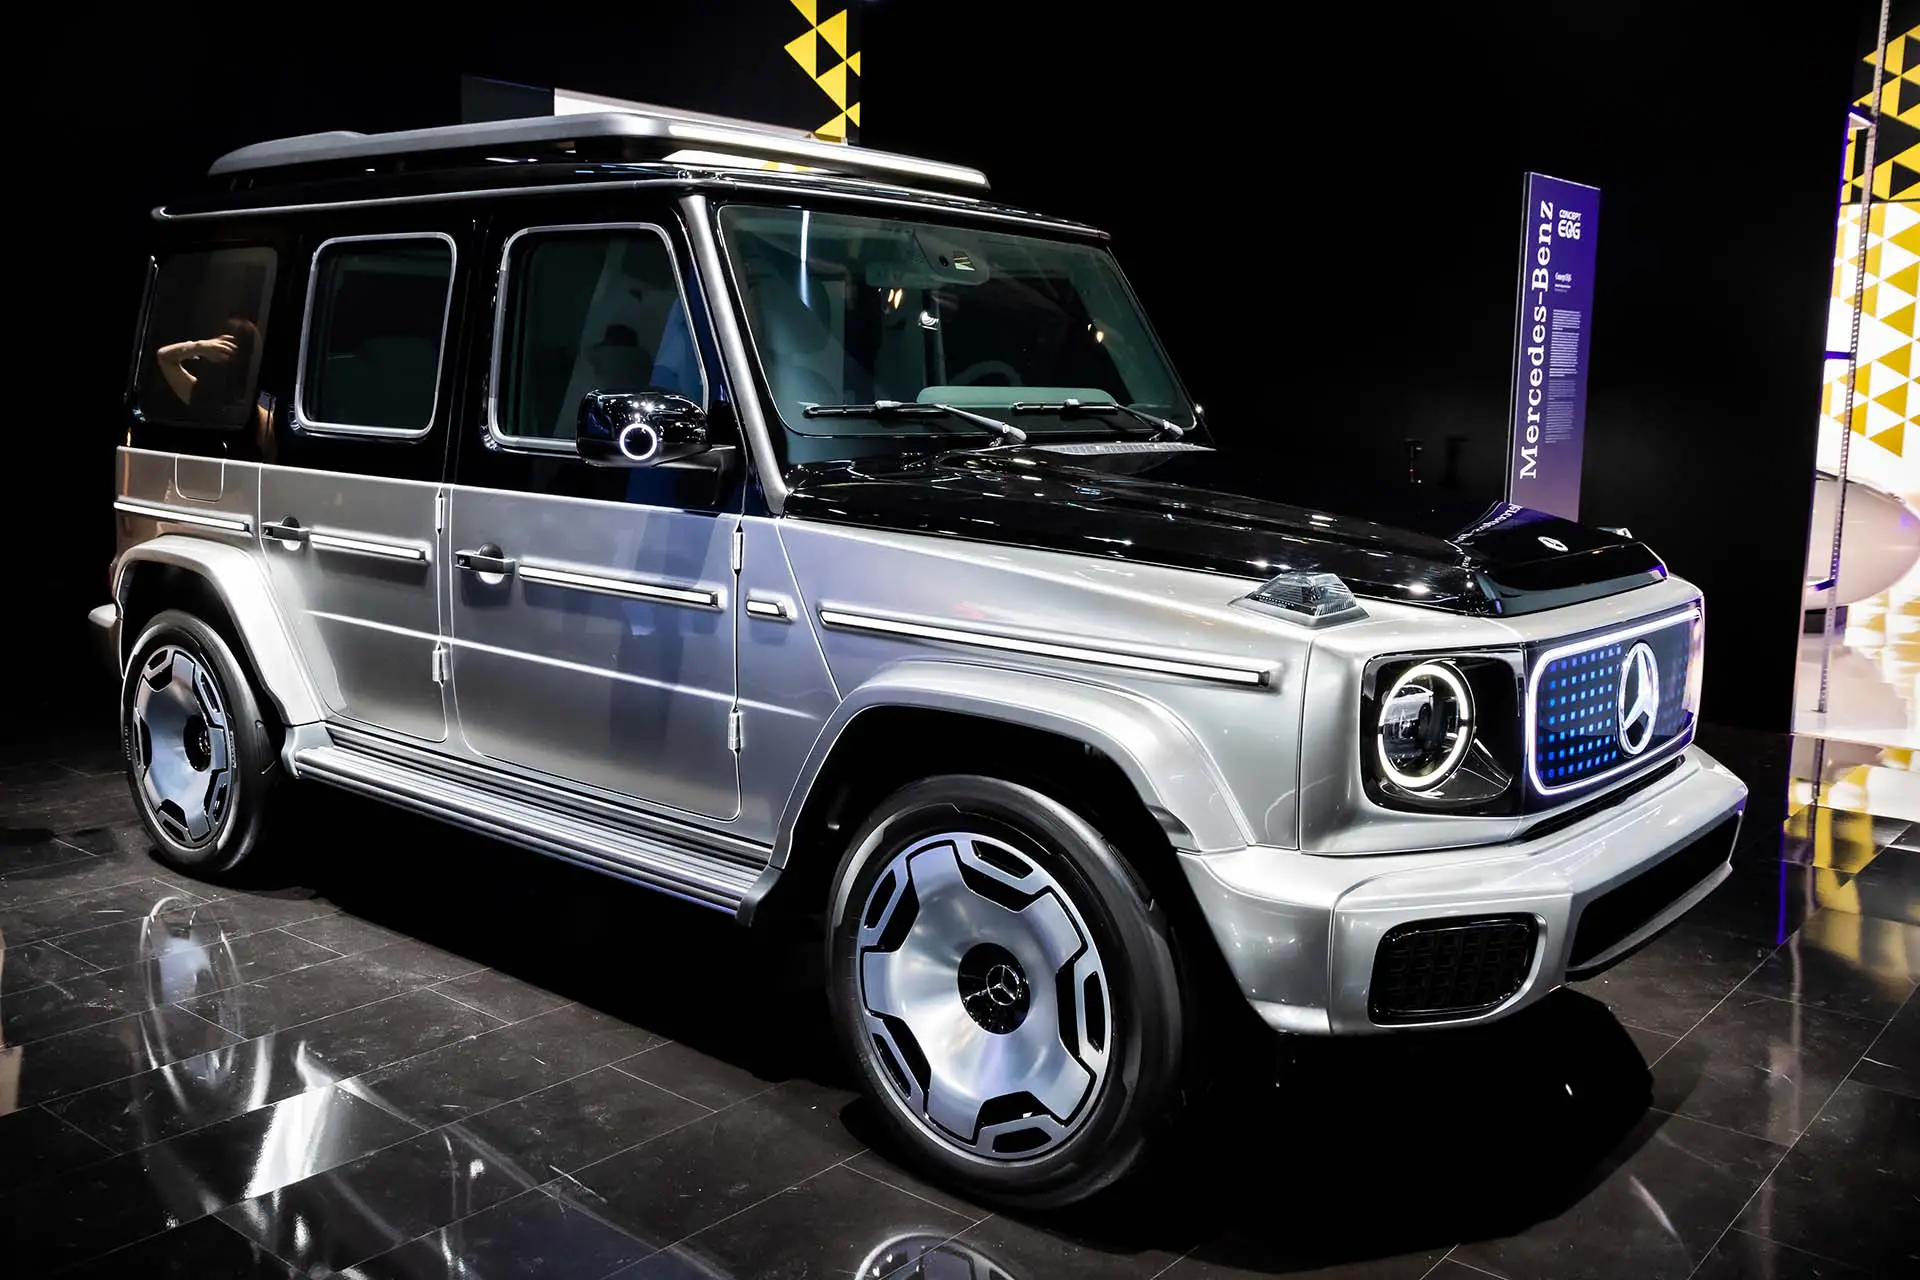 Mercedes Benz EQG concept G-Class electric car showcased at the IAA Mobility 2021 motor show in Munich, Germany - September 6, 2021.